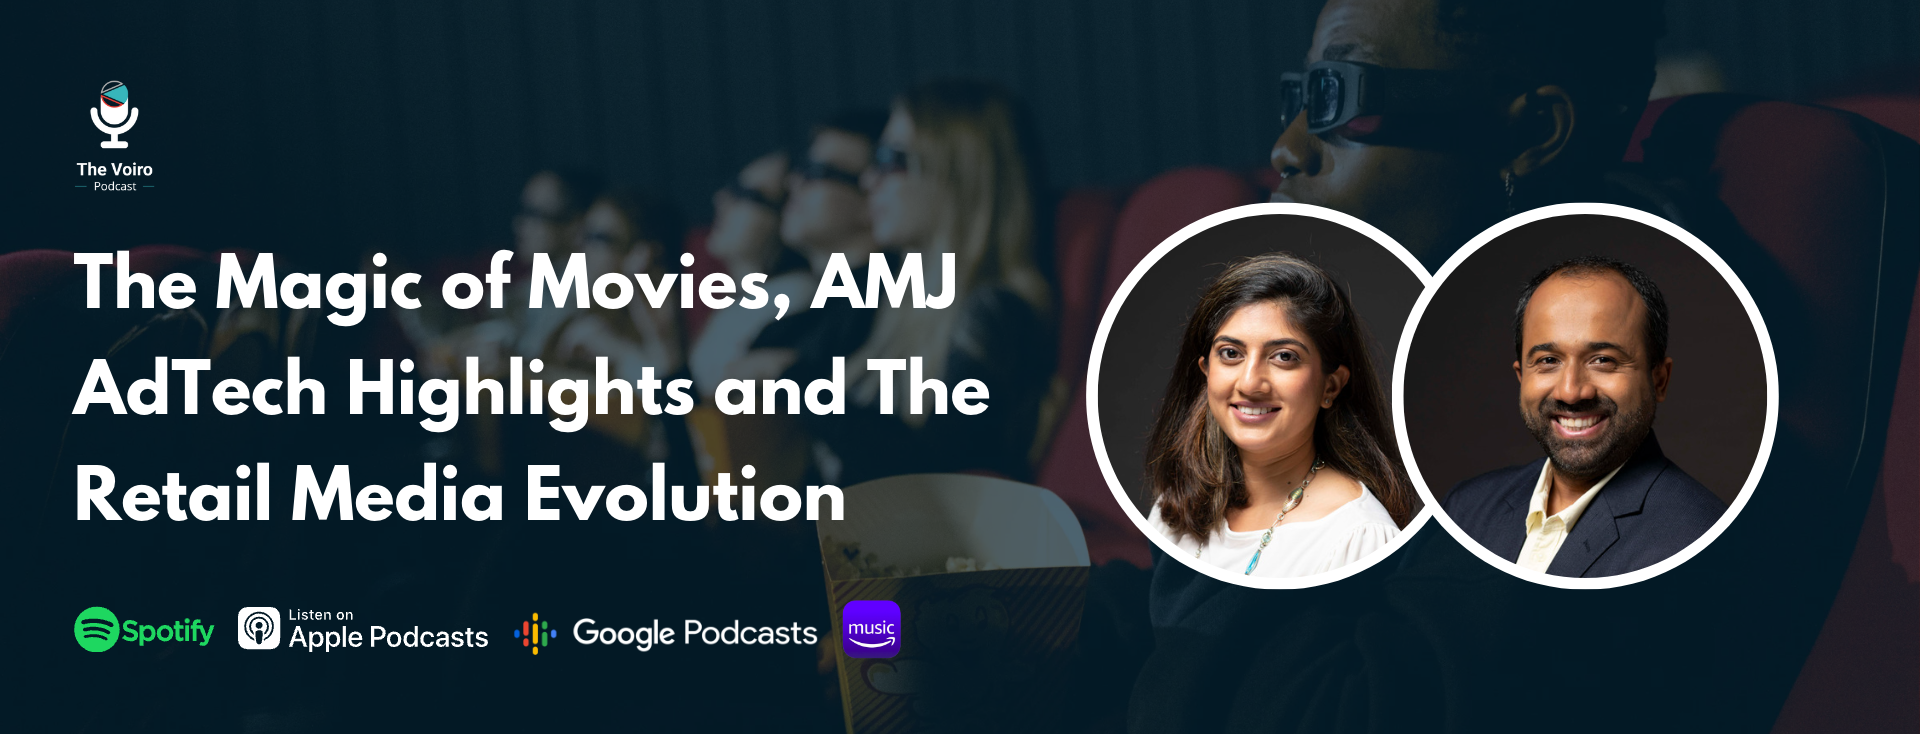 The Magic of Movies, AMJ AdTech Highlights and The Retail Media Evolution